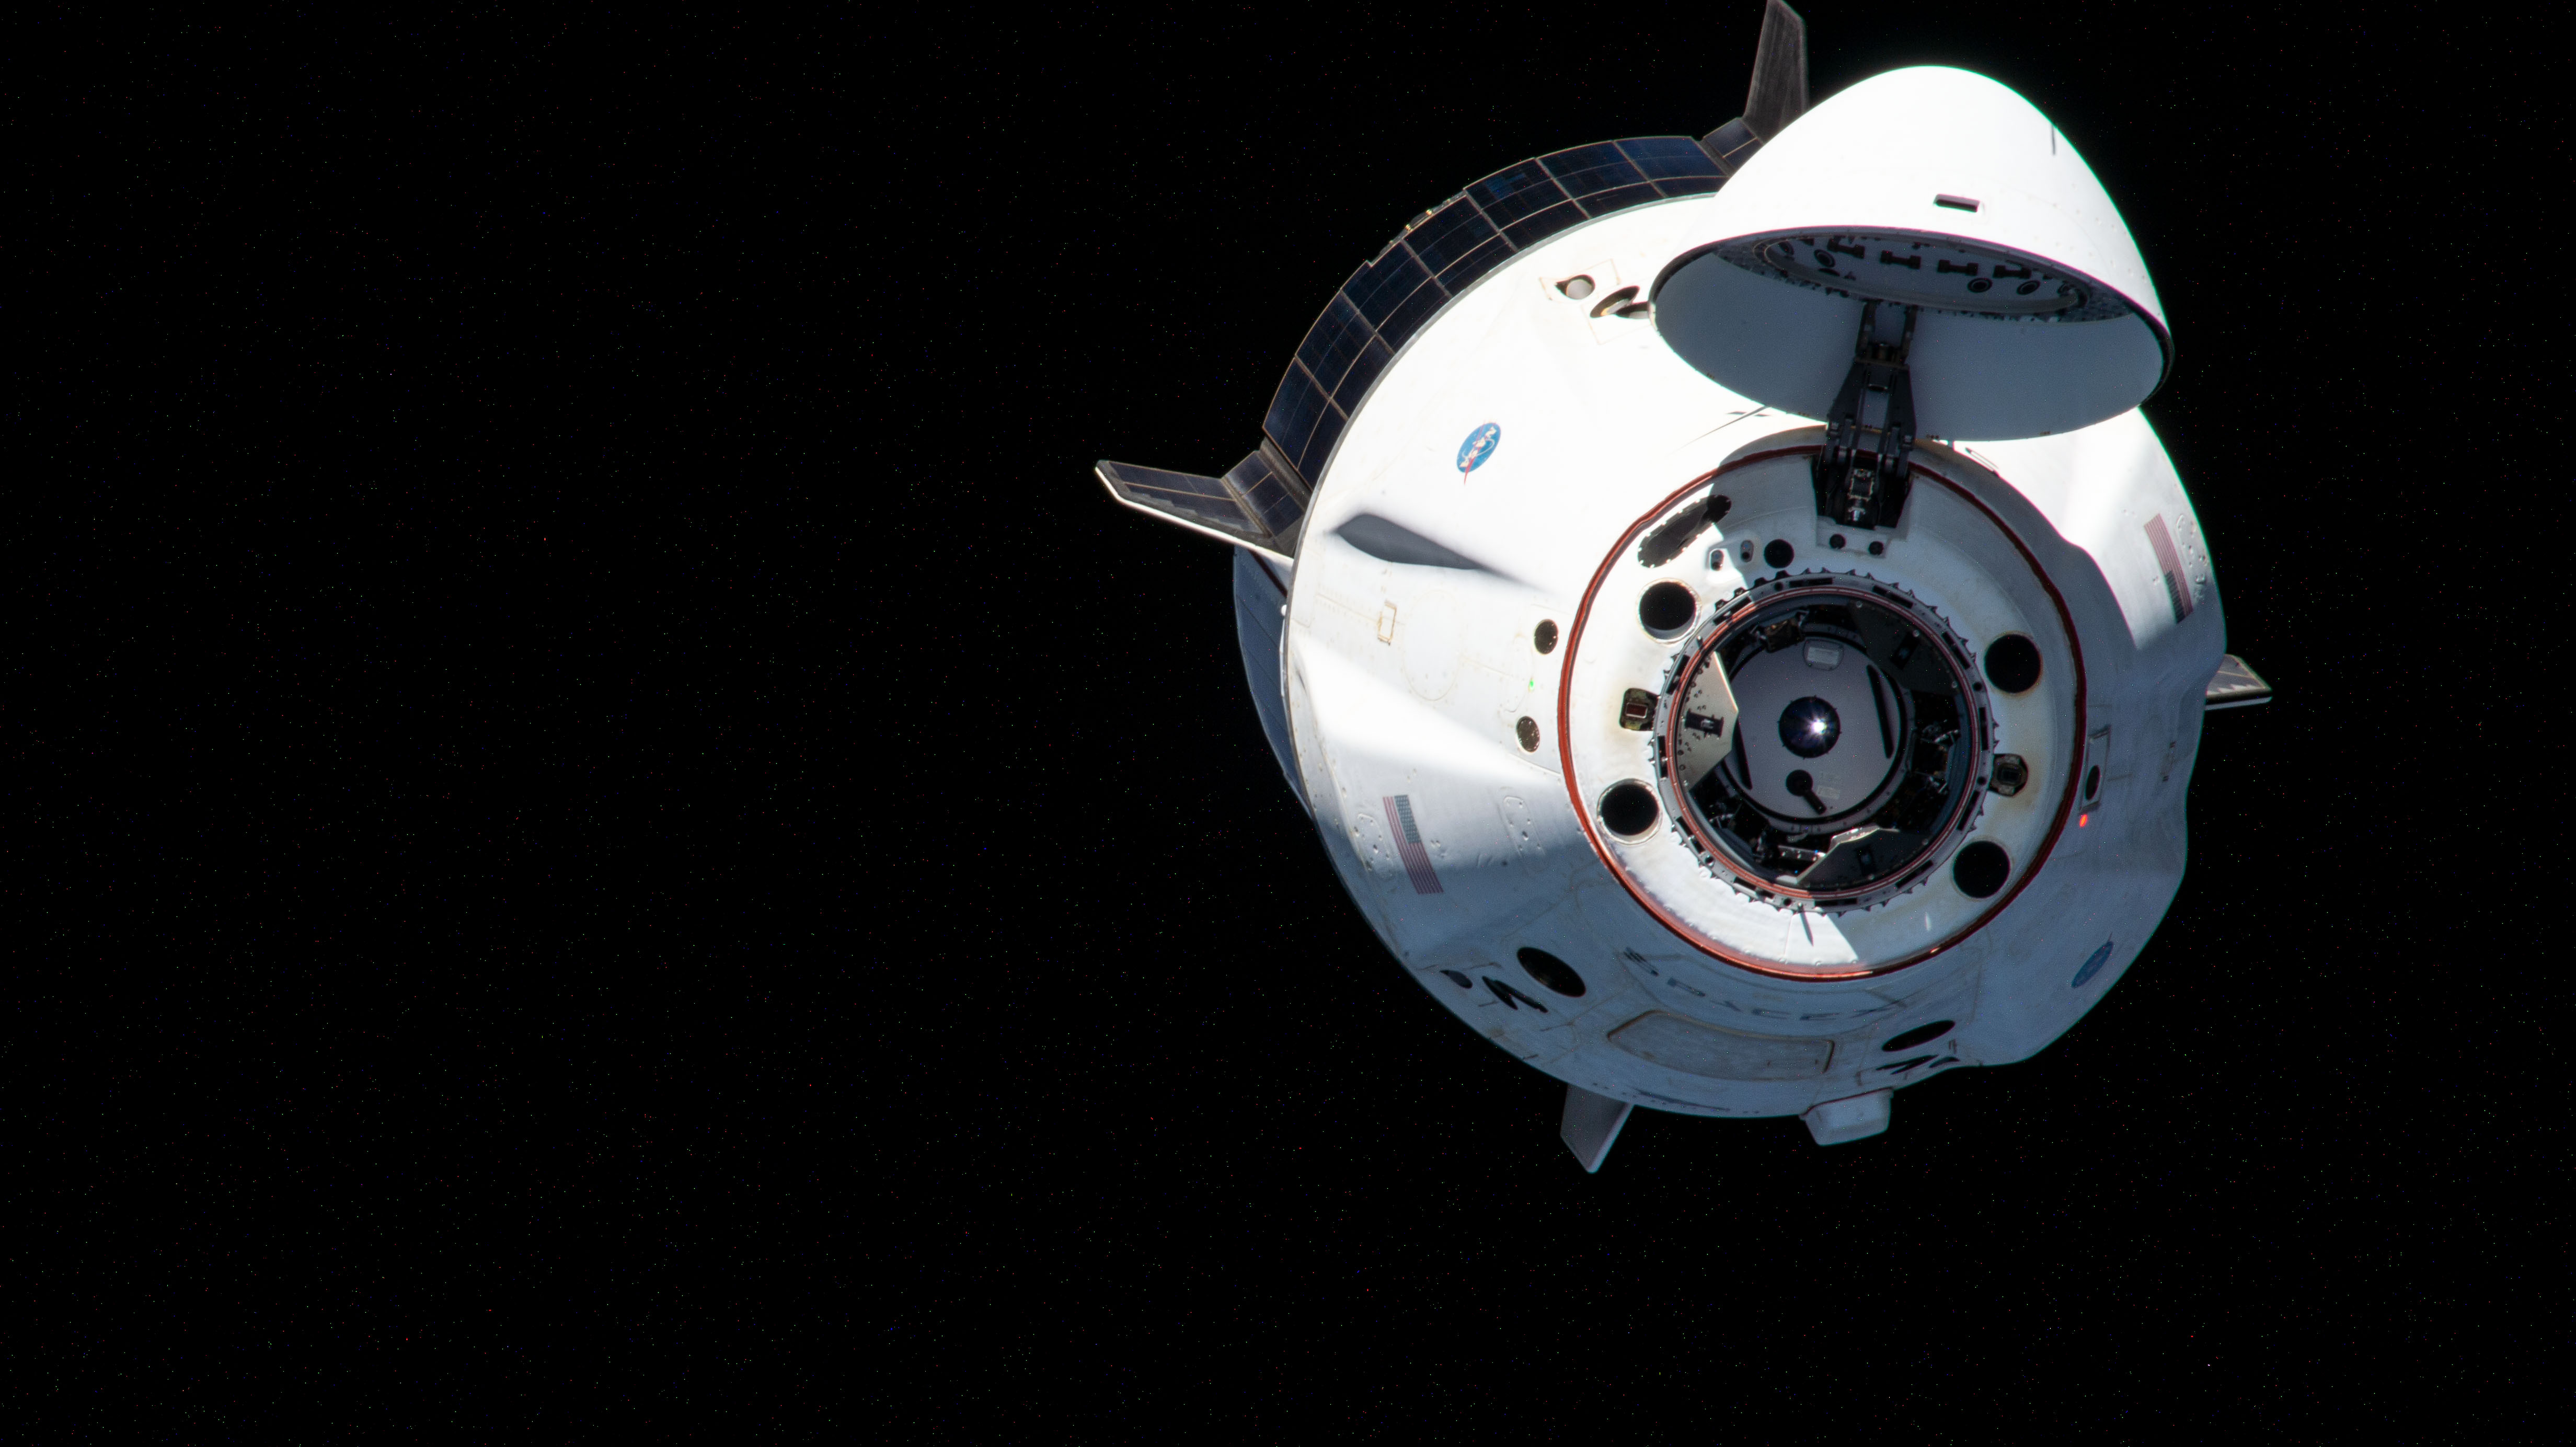 The SpaceX Crew Dragon Endeavour carrying four commercial crew astronauts departs the International Space Station.